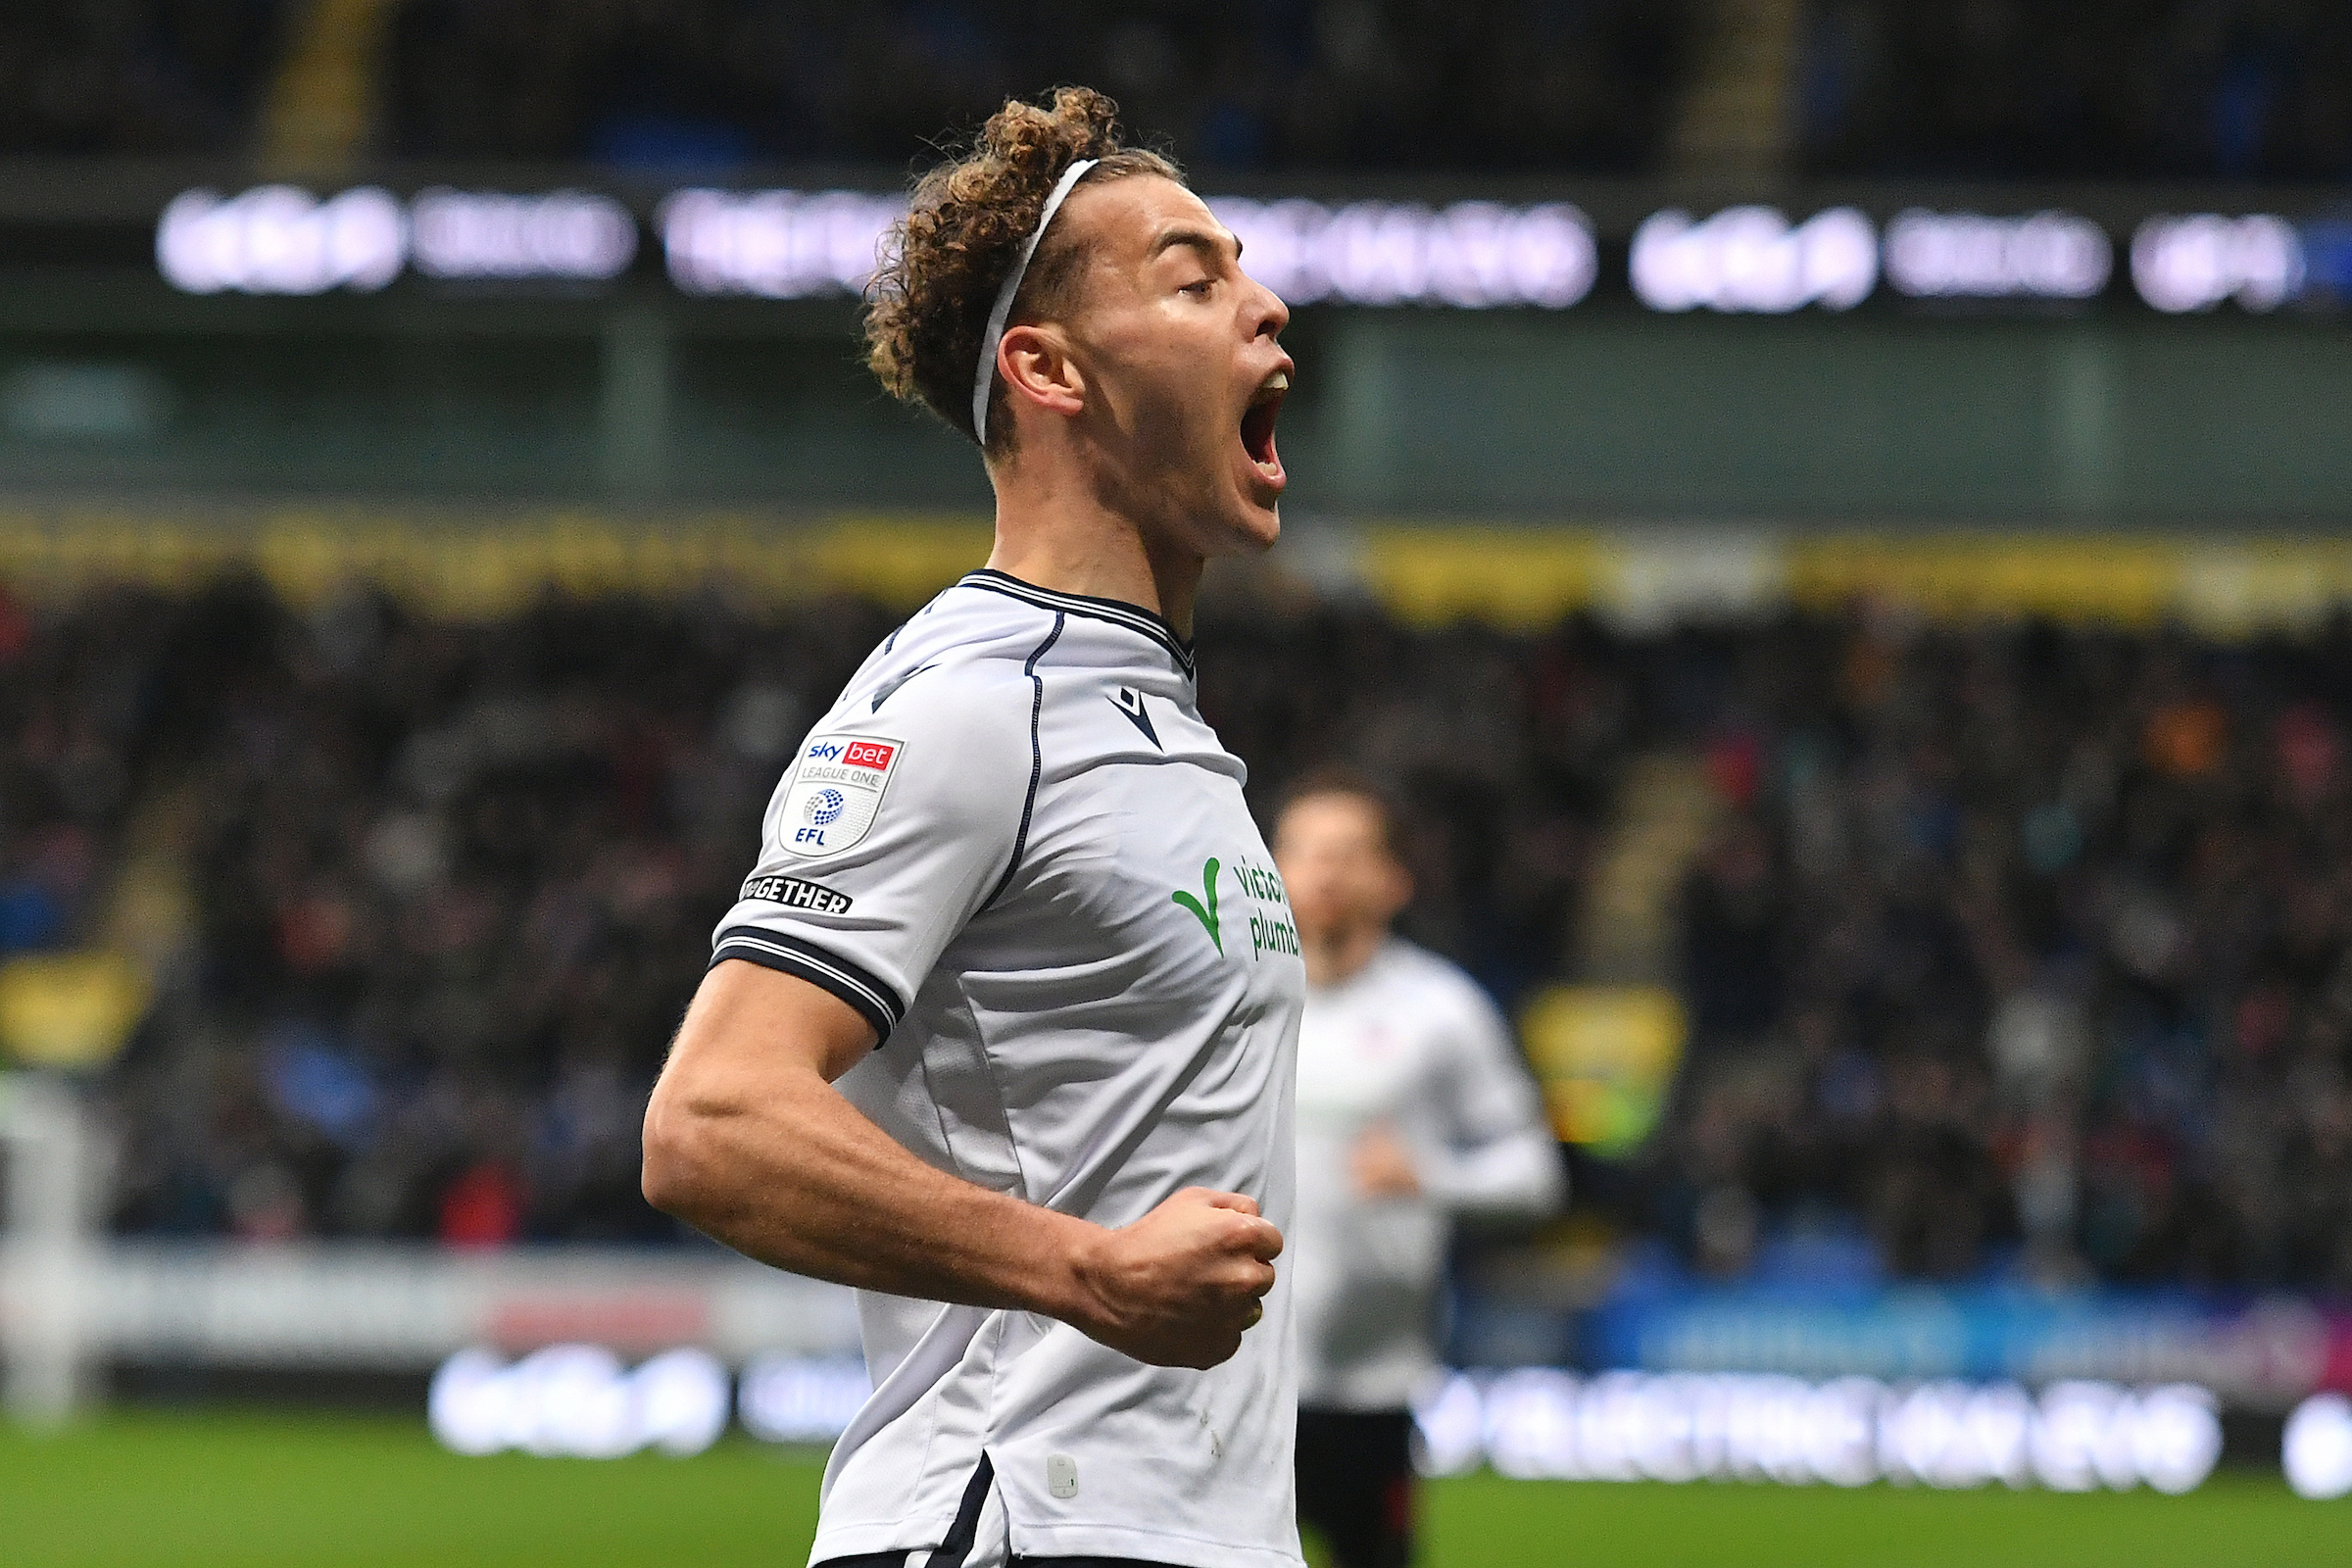 Bolton Wanderers: Charles set to miss 'two or three weeks'